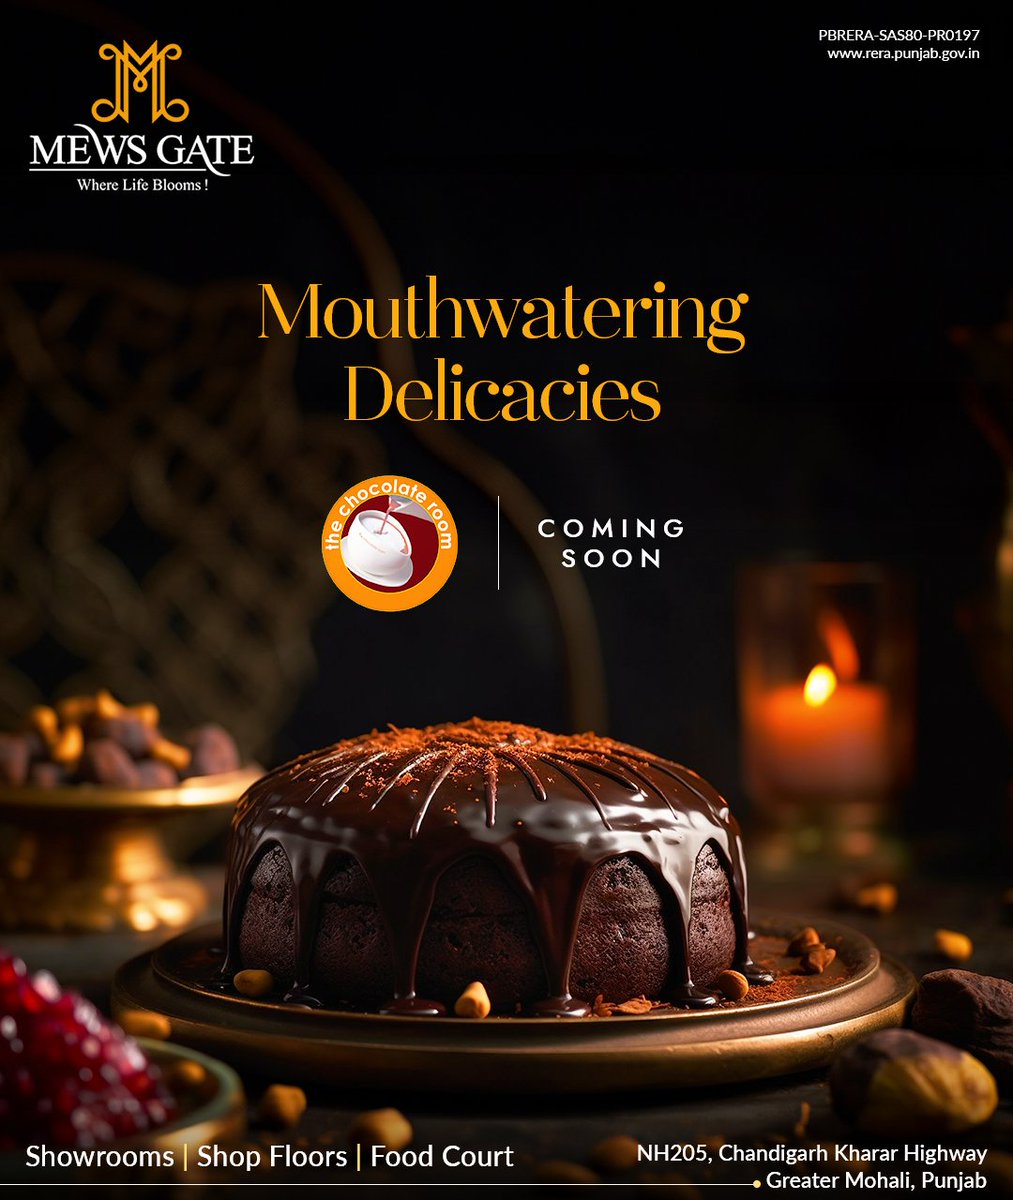 Brace yourself for a heavenly treat as The Chocolate Room is set to arrive at Mews Gate. Showrooms | Shop Floors | Food Court 📍NH 205, Chandigarh Kharar Highway Greater Mohali, Punjab ↘️Call us at 90695-90695 #MewsGate #TheChocolateRoom #RealEstate #Food #Kharar #Mohali